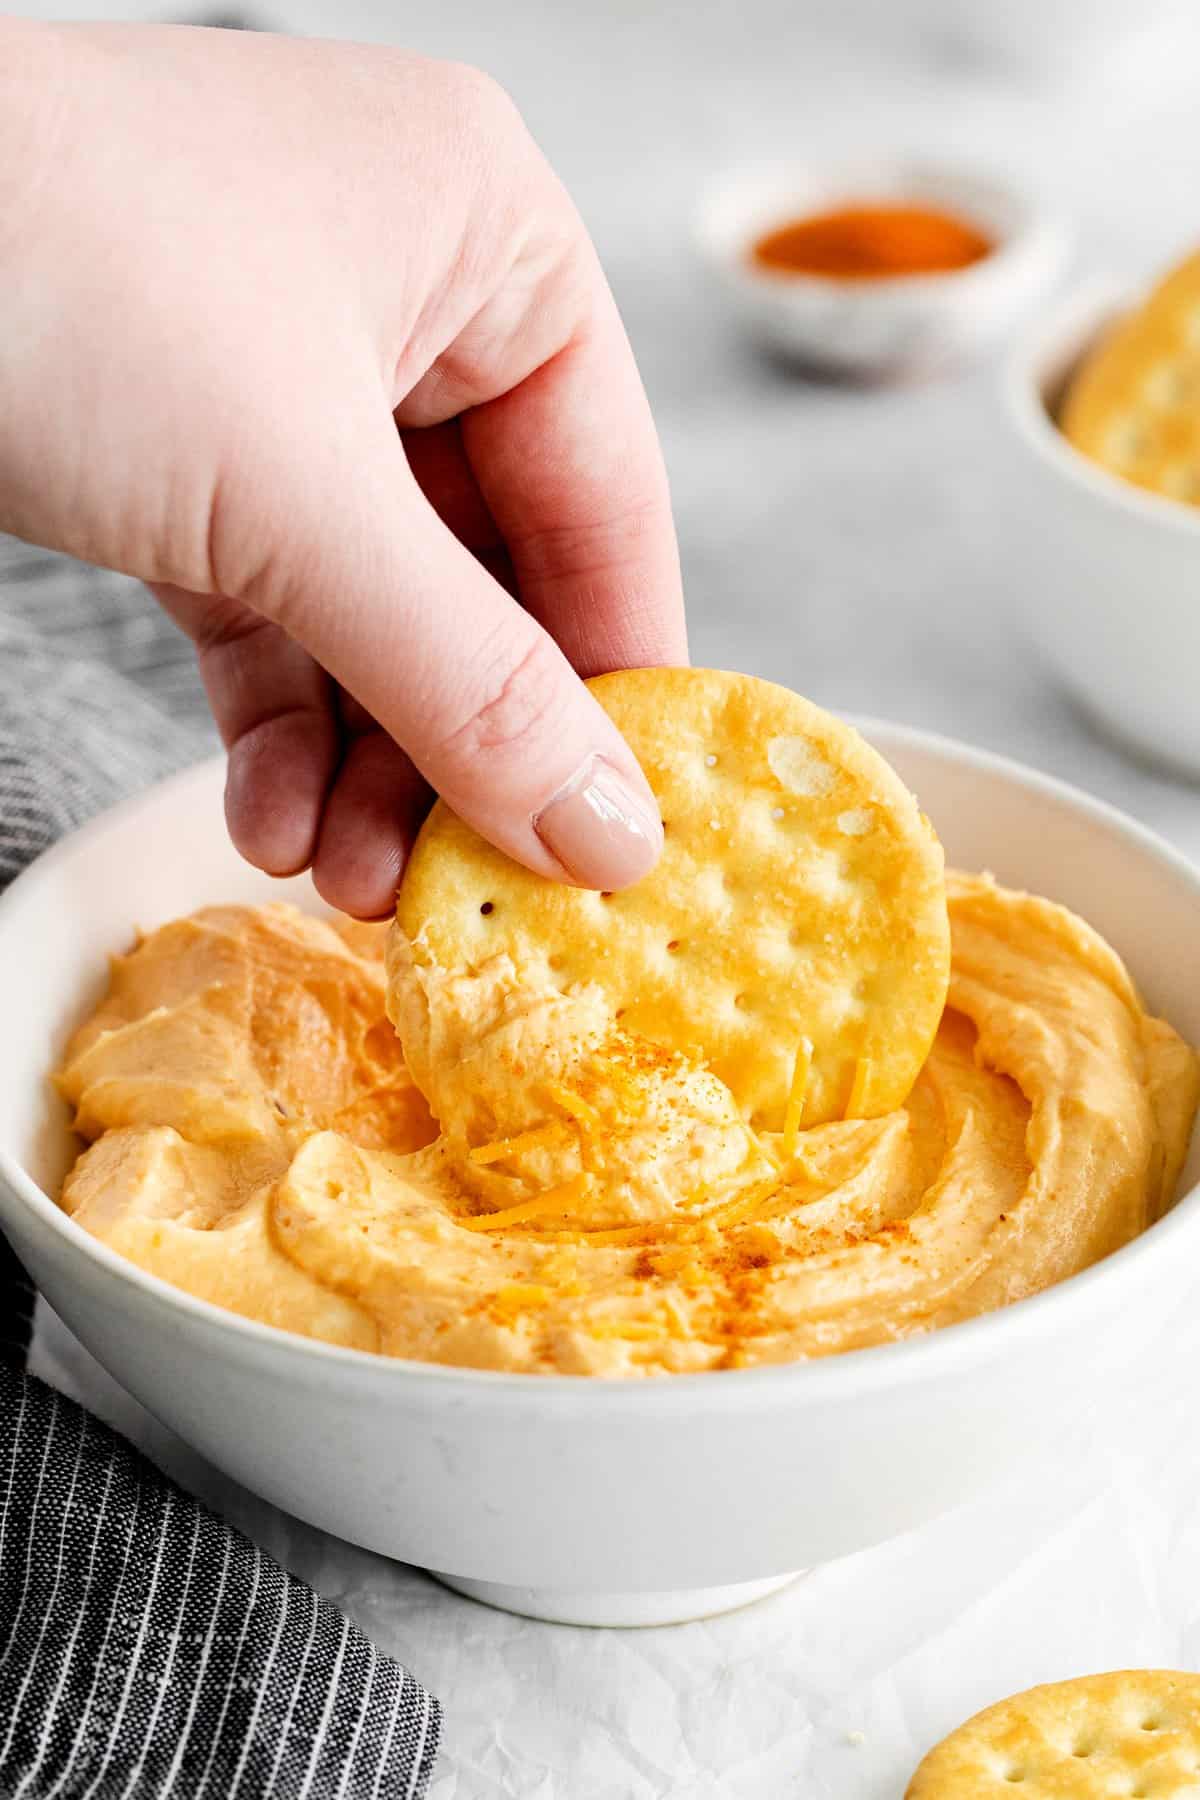 Person dipping a cracker in homemade cheese spread.